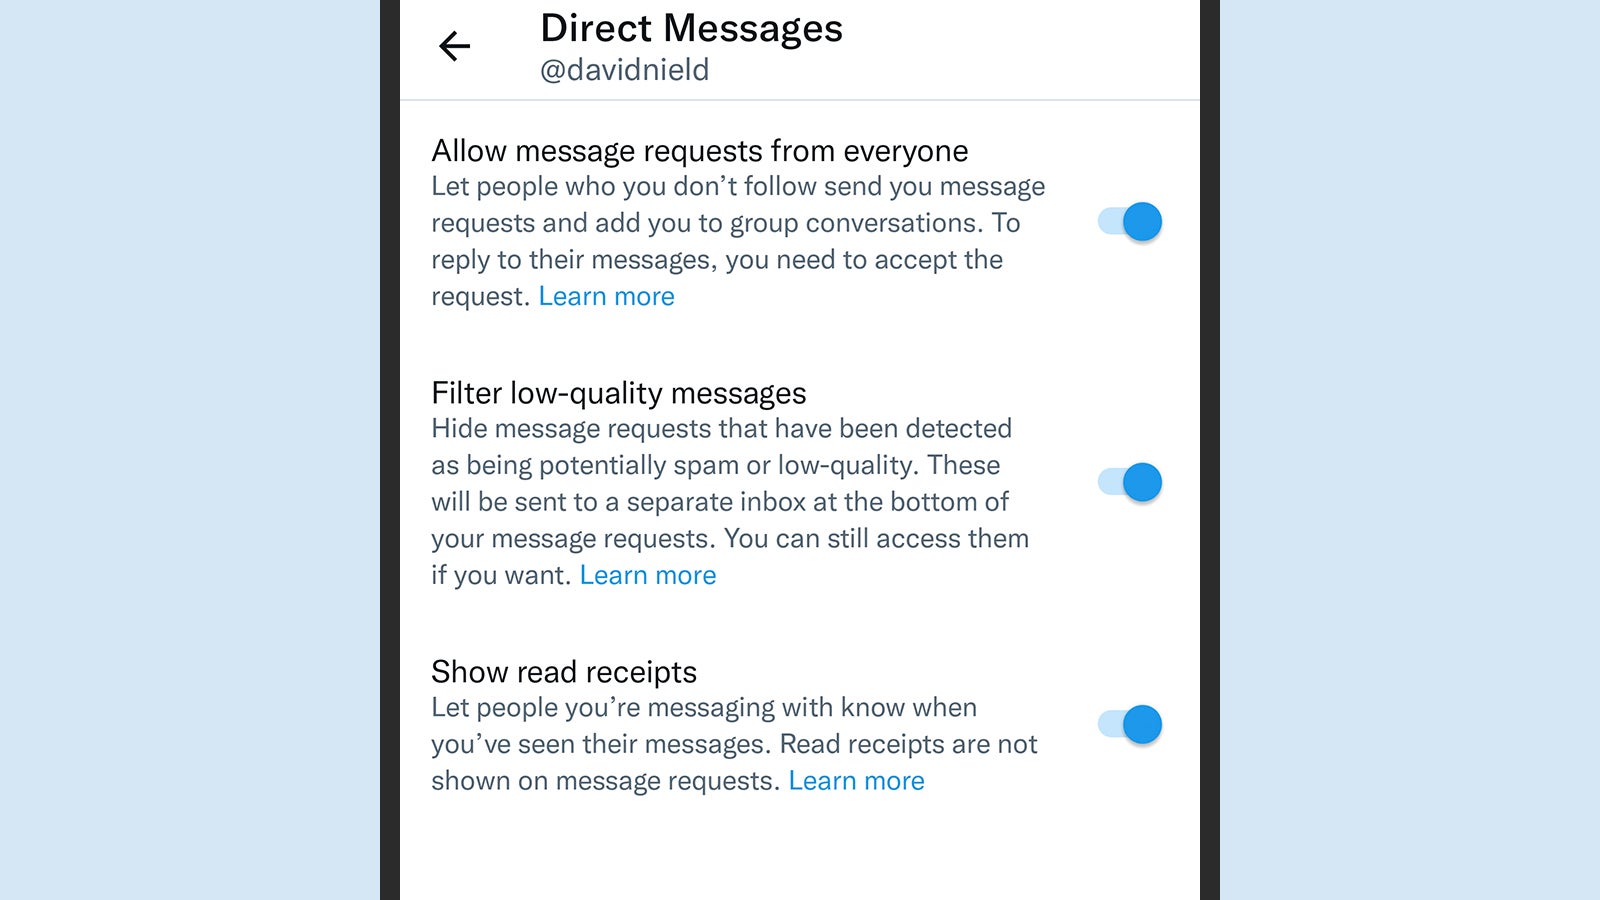 How to Turn Twitter Read Receipts on or Off